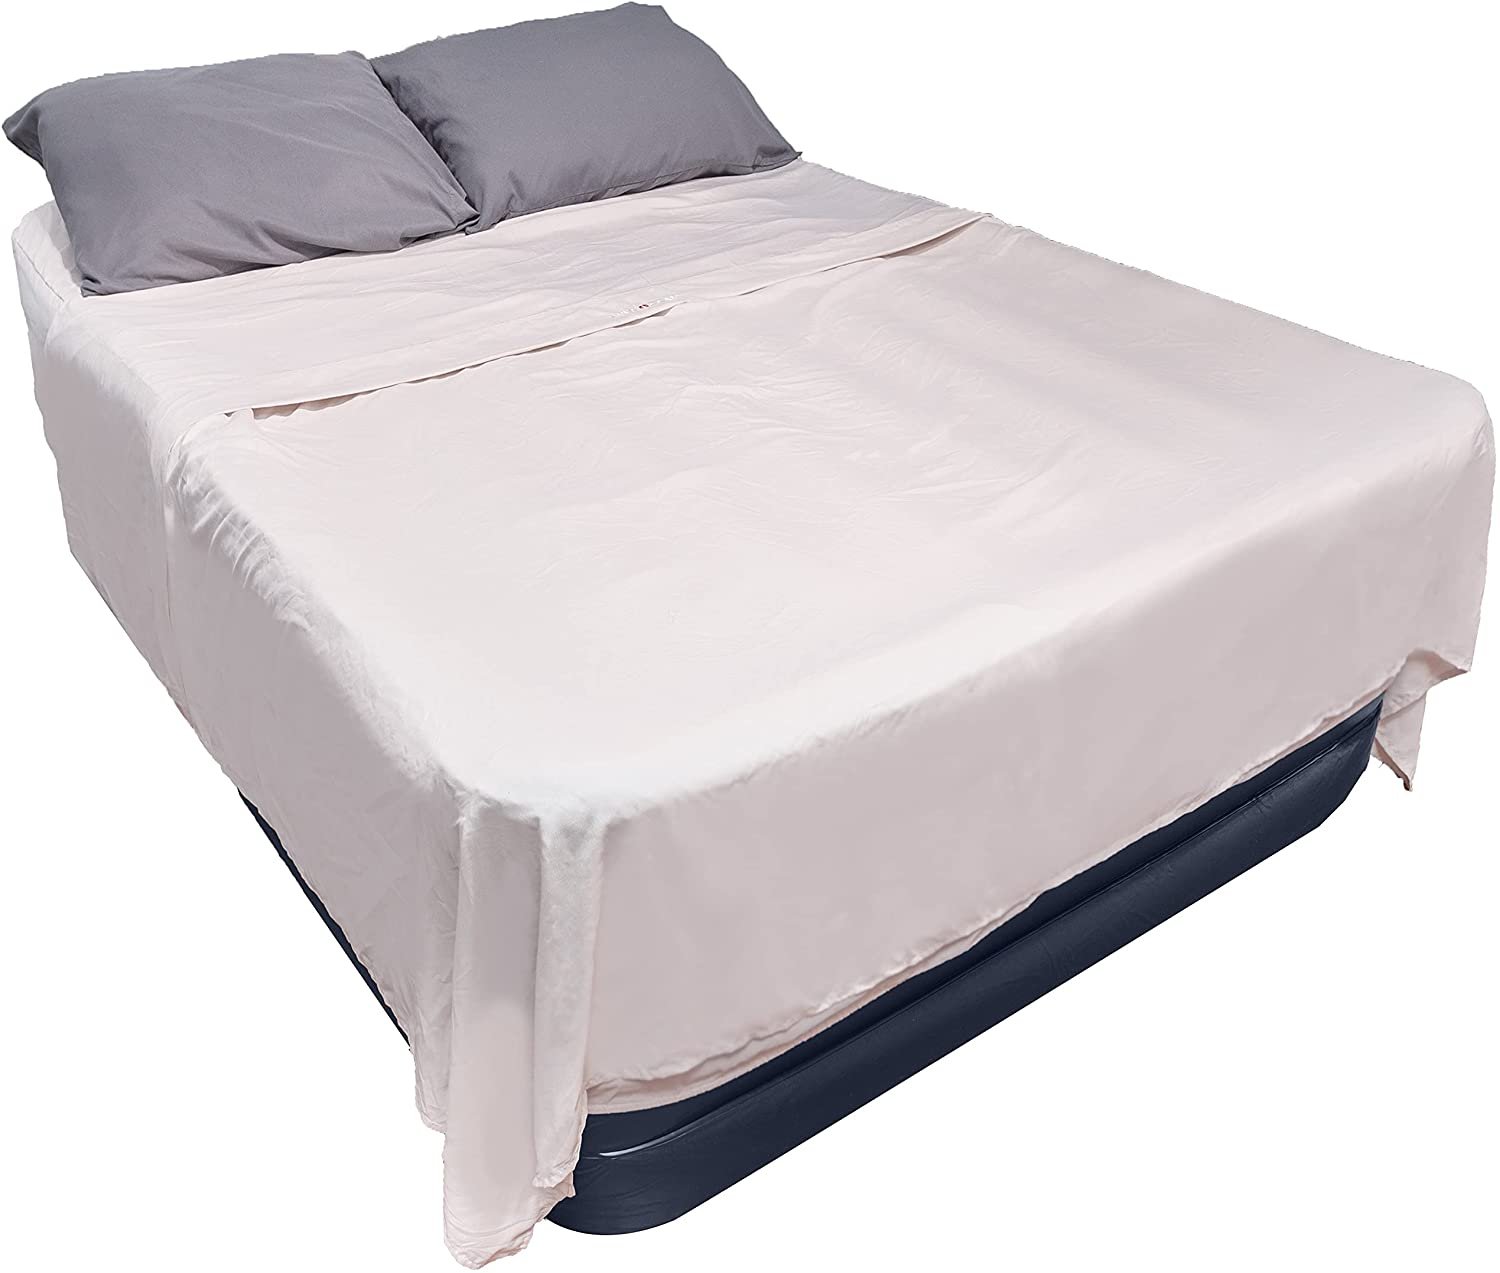 If an air bed has a lump, first remove all the bedding and loose accessories, before starting the repair.